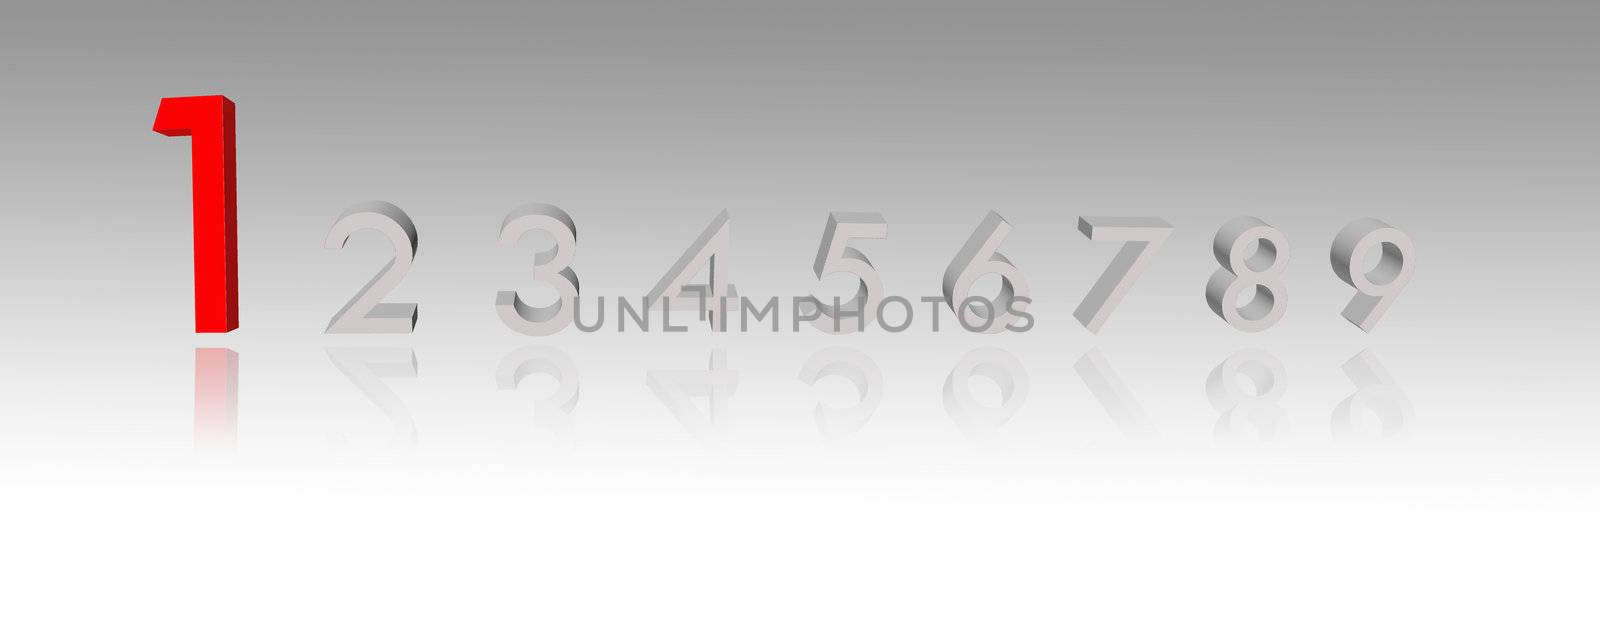 3d numbers isolated on white background